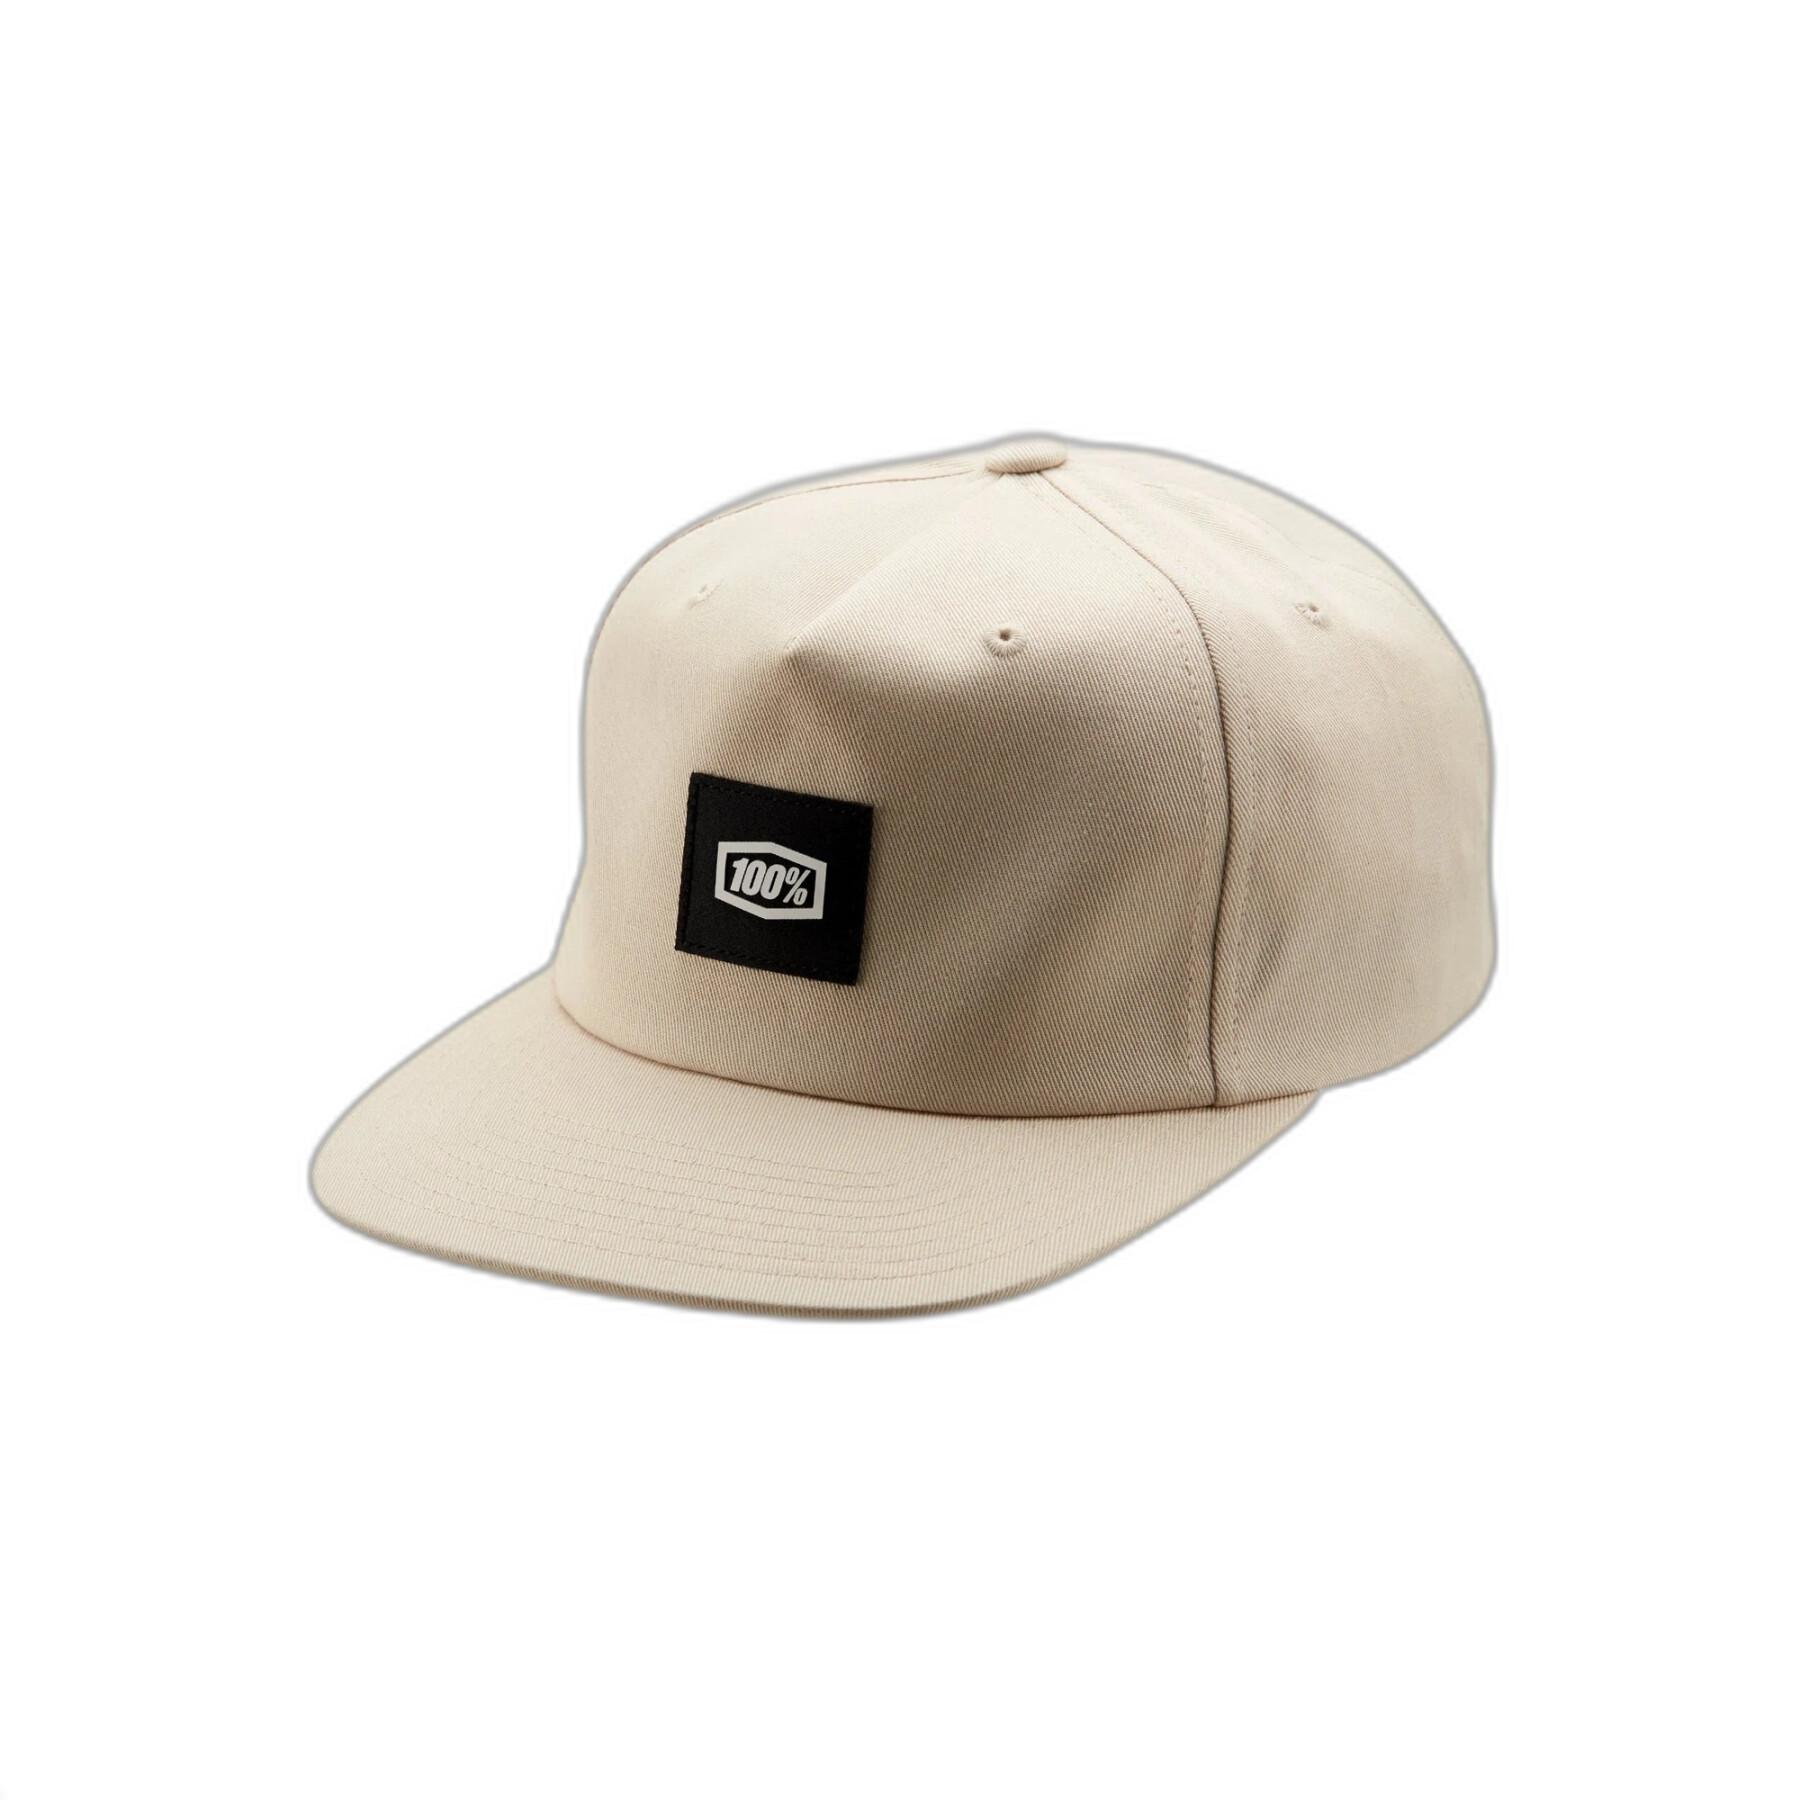 Pet 100% lincoln snapback unstructured lyp fit